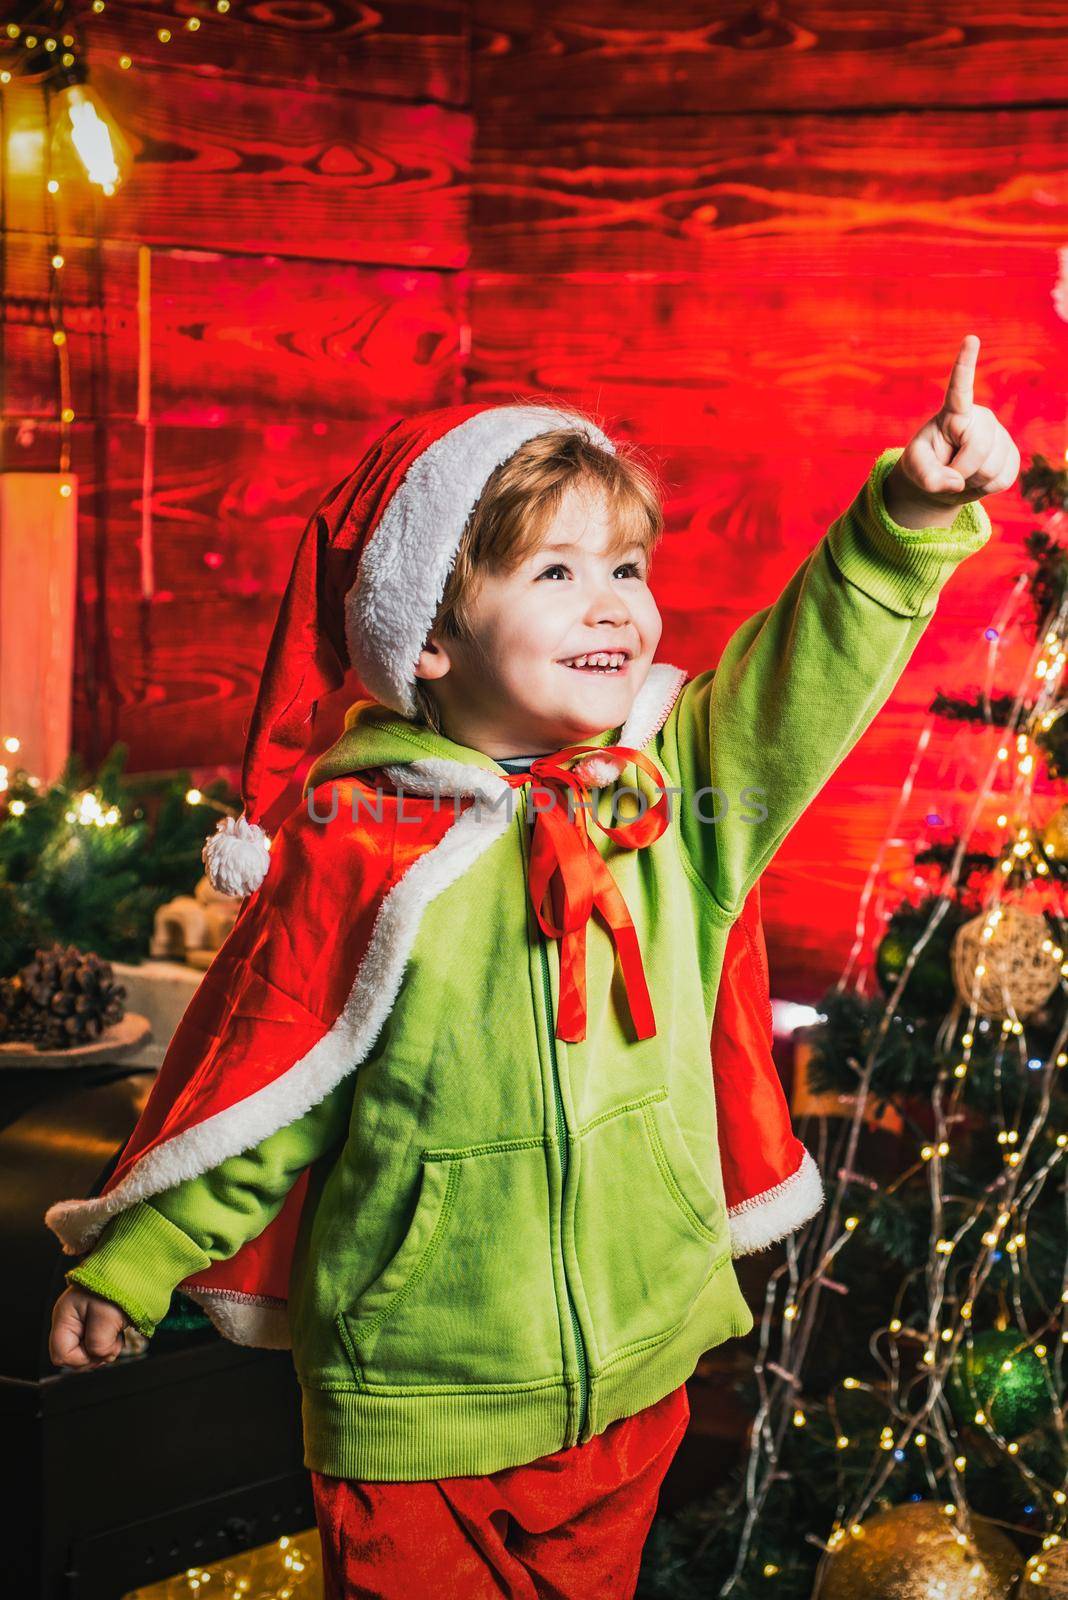 Magic Christmas night for kids. Happy excited smiling boy with pointing finger by the Christmas tree. Little kid is wearing Santa clothes. by Tverdokhlib